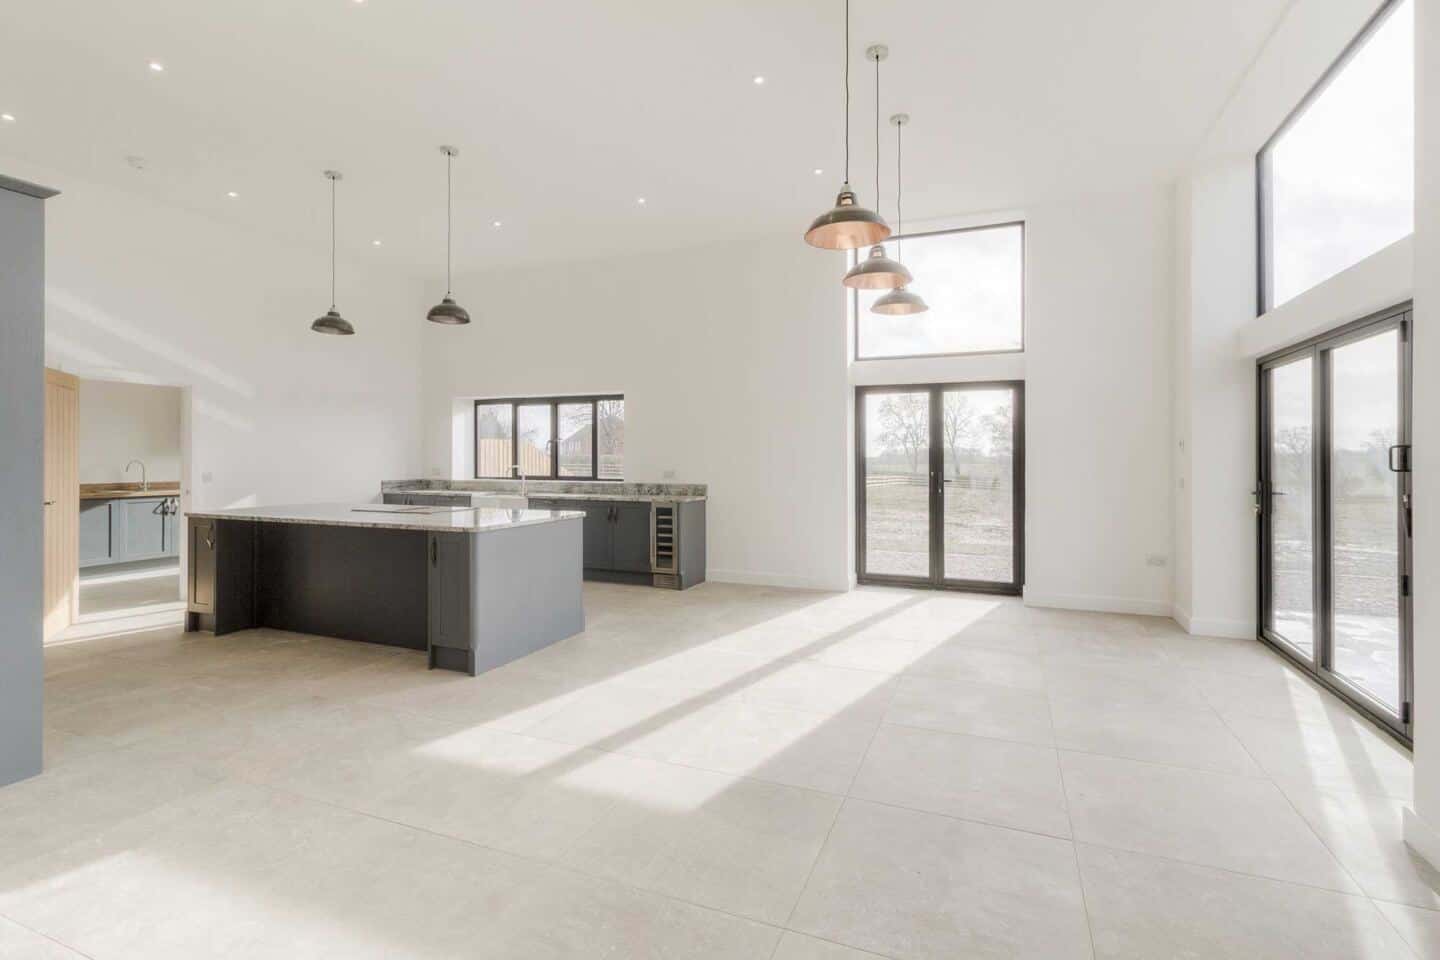 Aluminium doors and windows maximise the natural light in this large open-plan kitchen